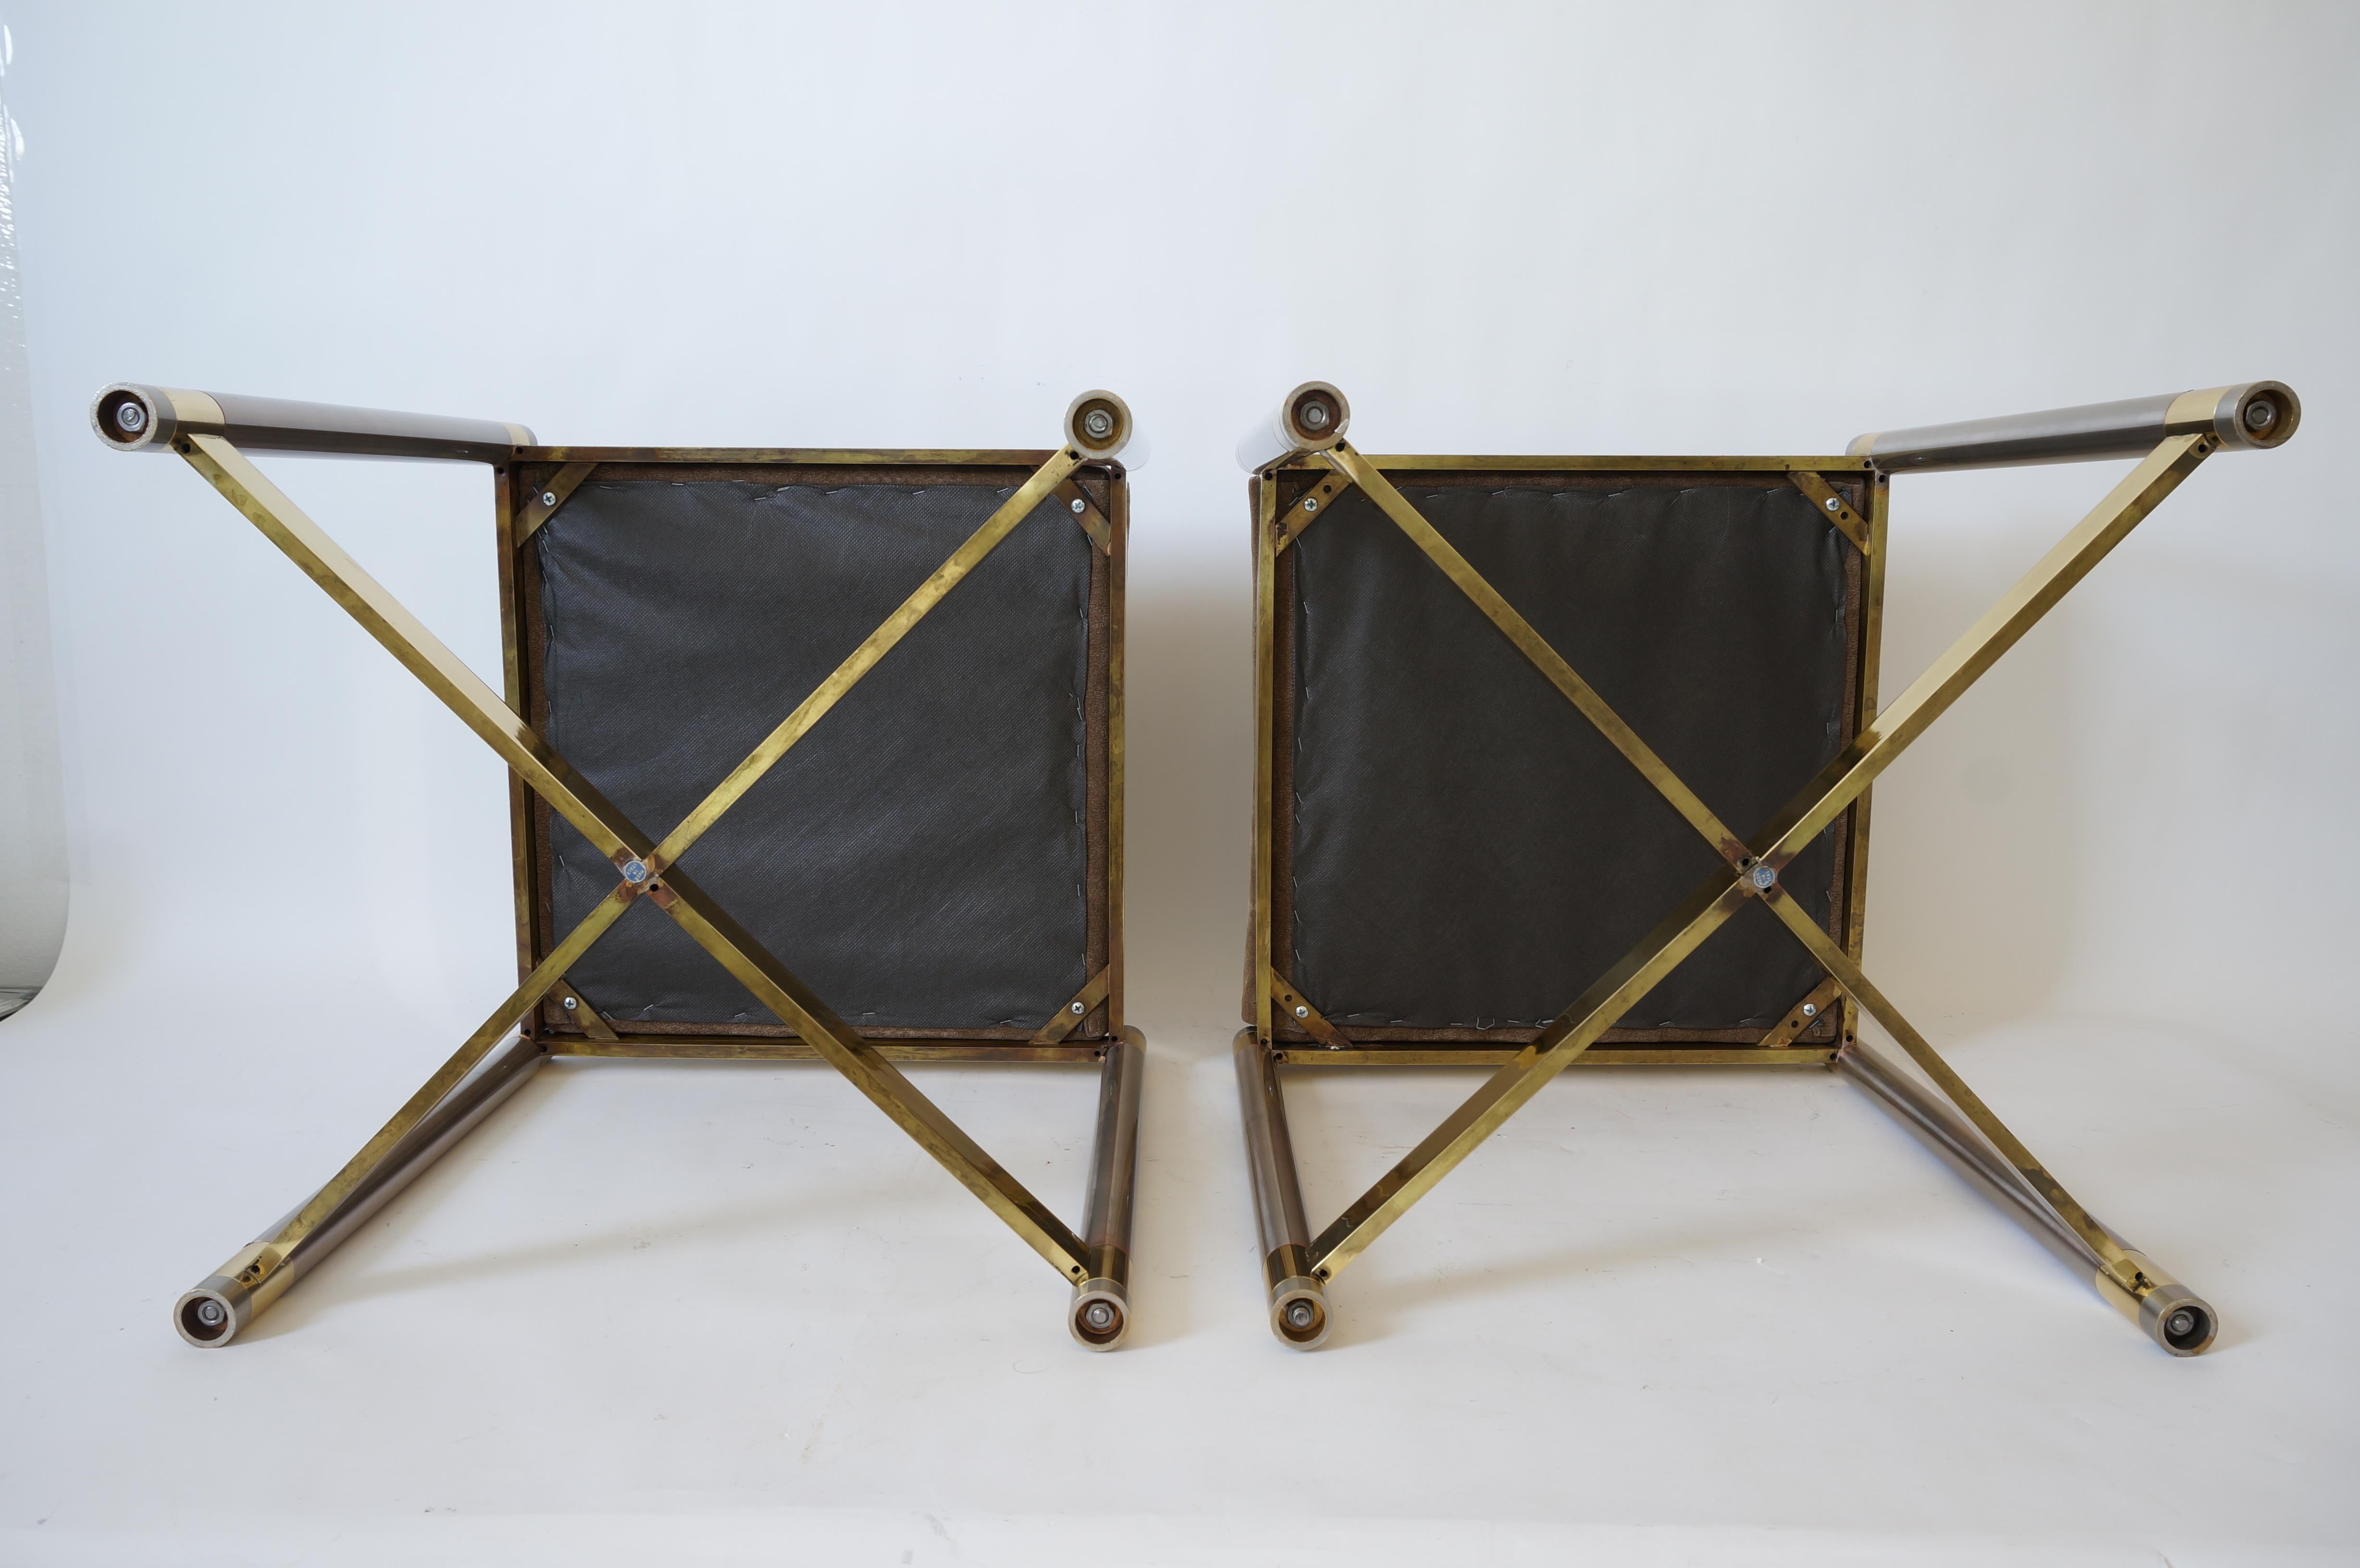 Italian Pair of Benches in Stainless Steel and Brass Attributed to Maison Jansen